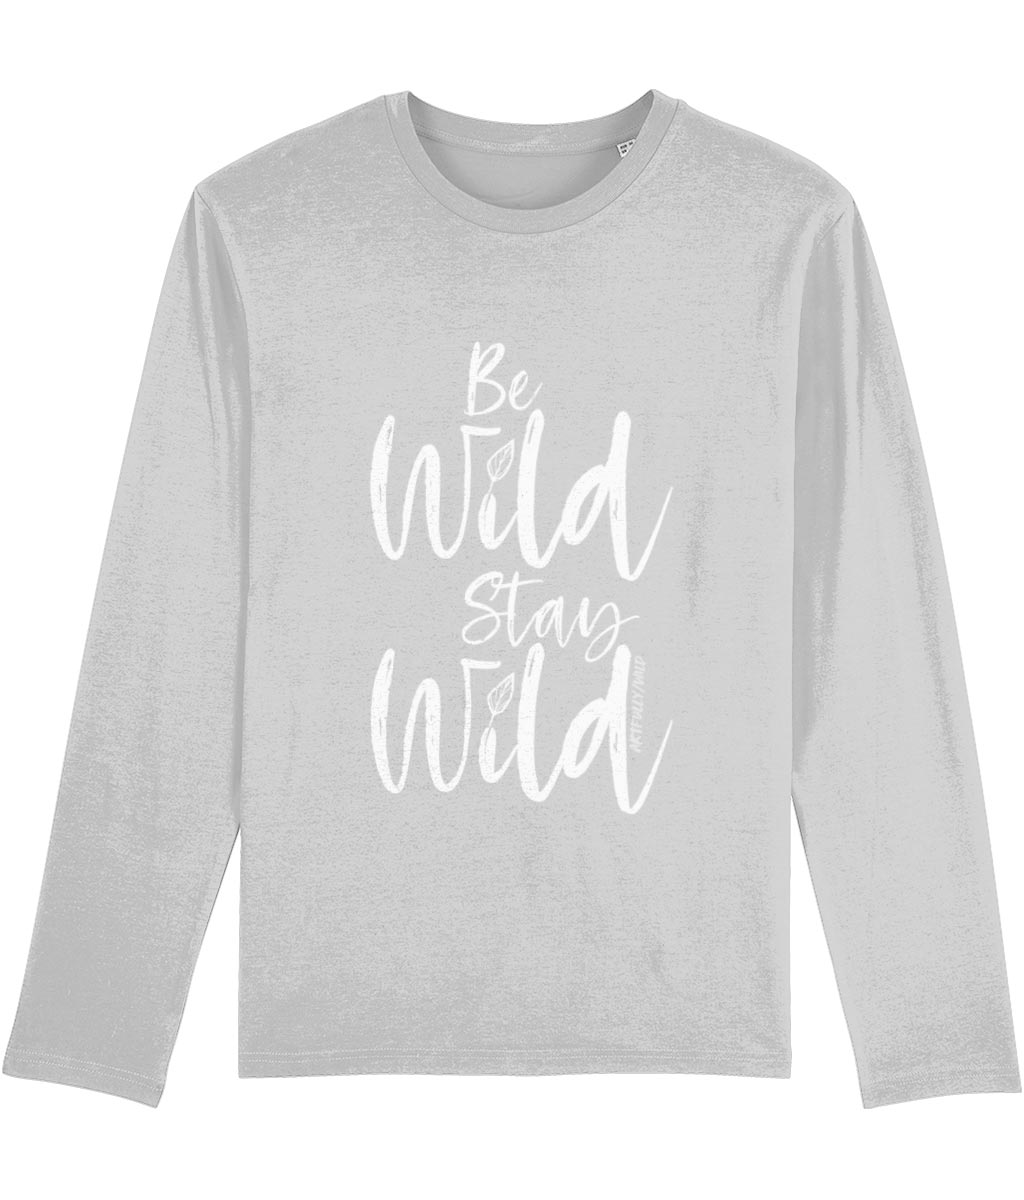 ‘BE WILD STAY WILD’ Men's Grey Marl Long-Sleeved T-Shirt. Certified organic cotton. White slogan print with water-based inks.